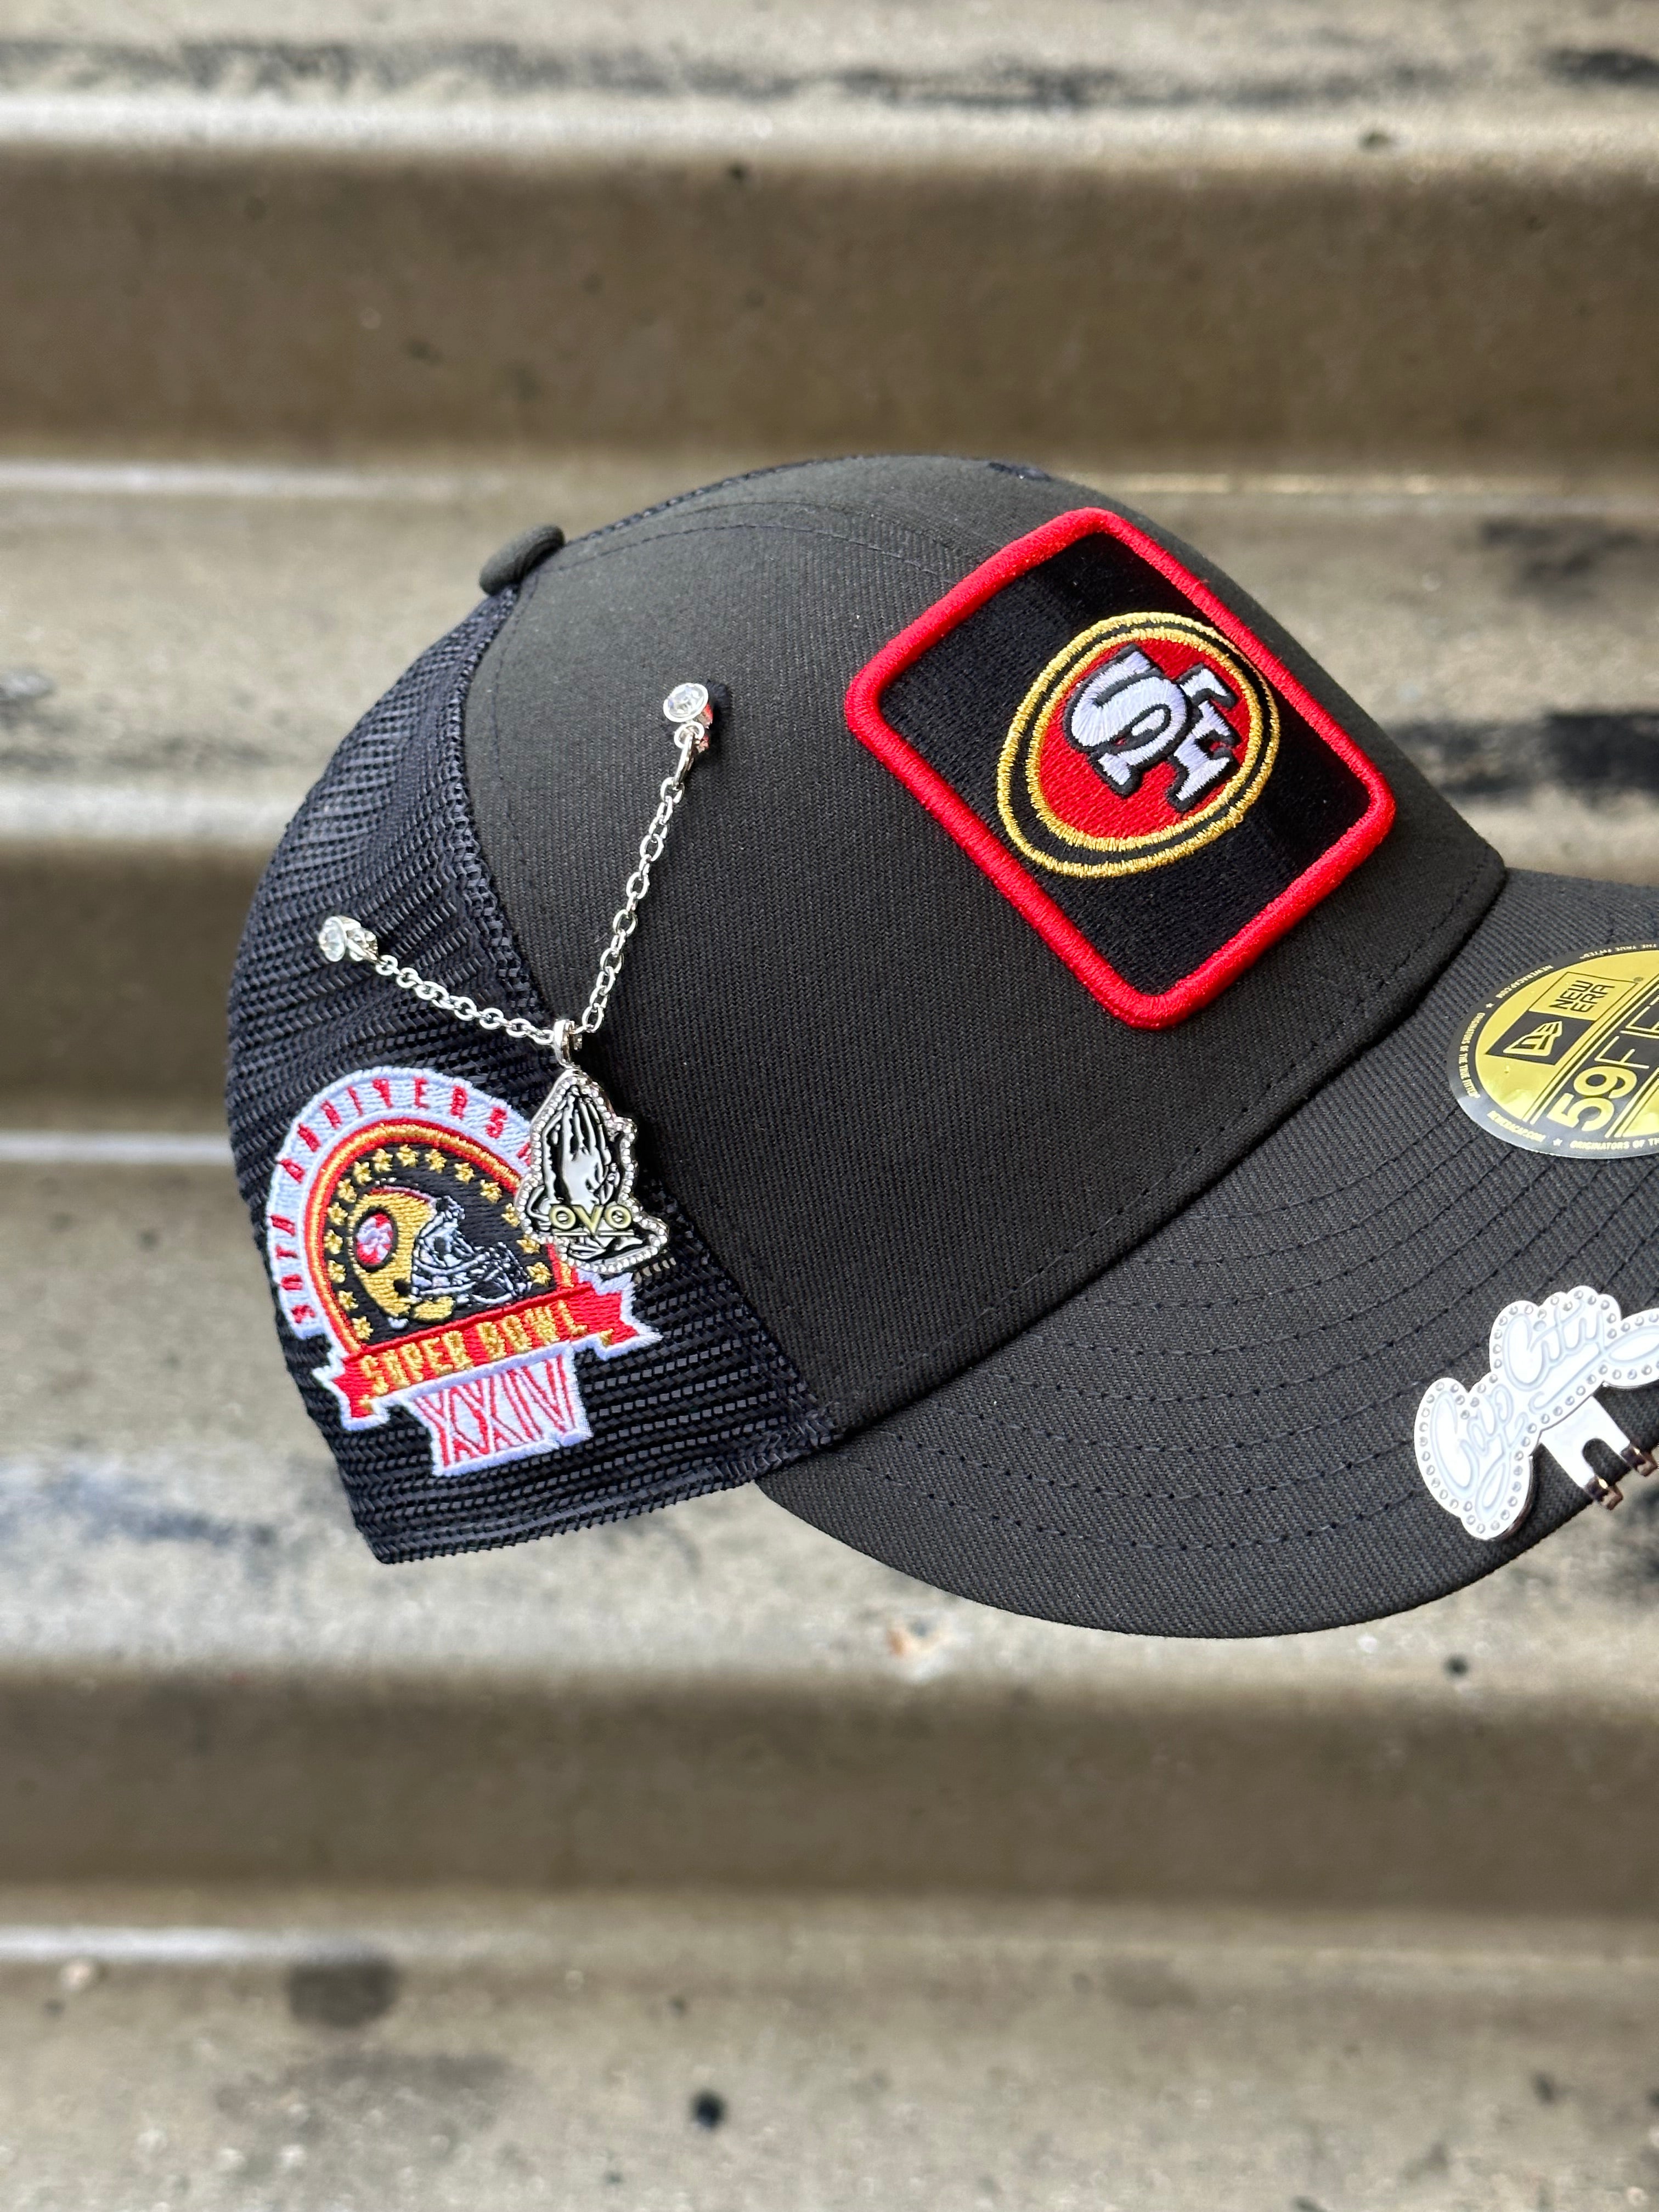 NEW ERA EXCLUSIVE 59FIFTY BLACK SAN FRANSICO 49ERS MESHBACK W/ XXIV SUPER BOWL SIDEPATCH